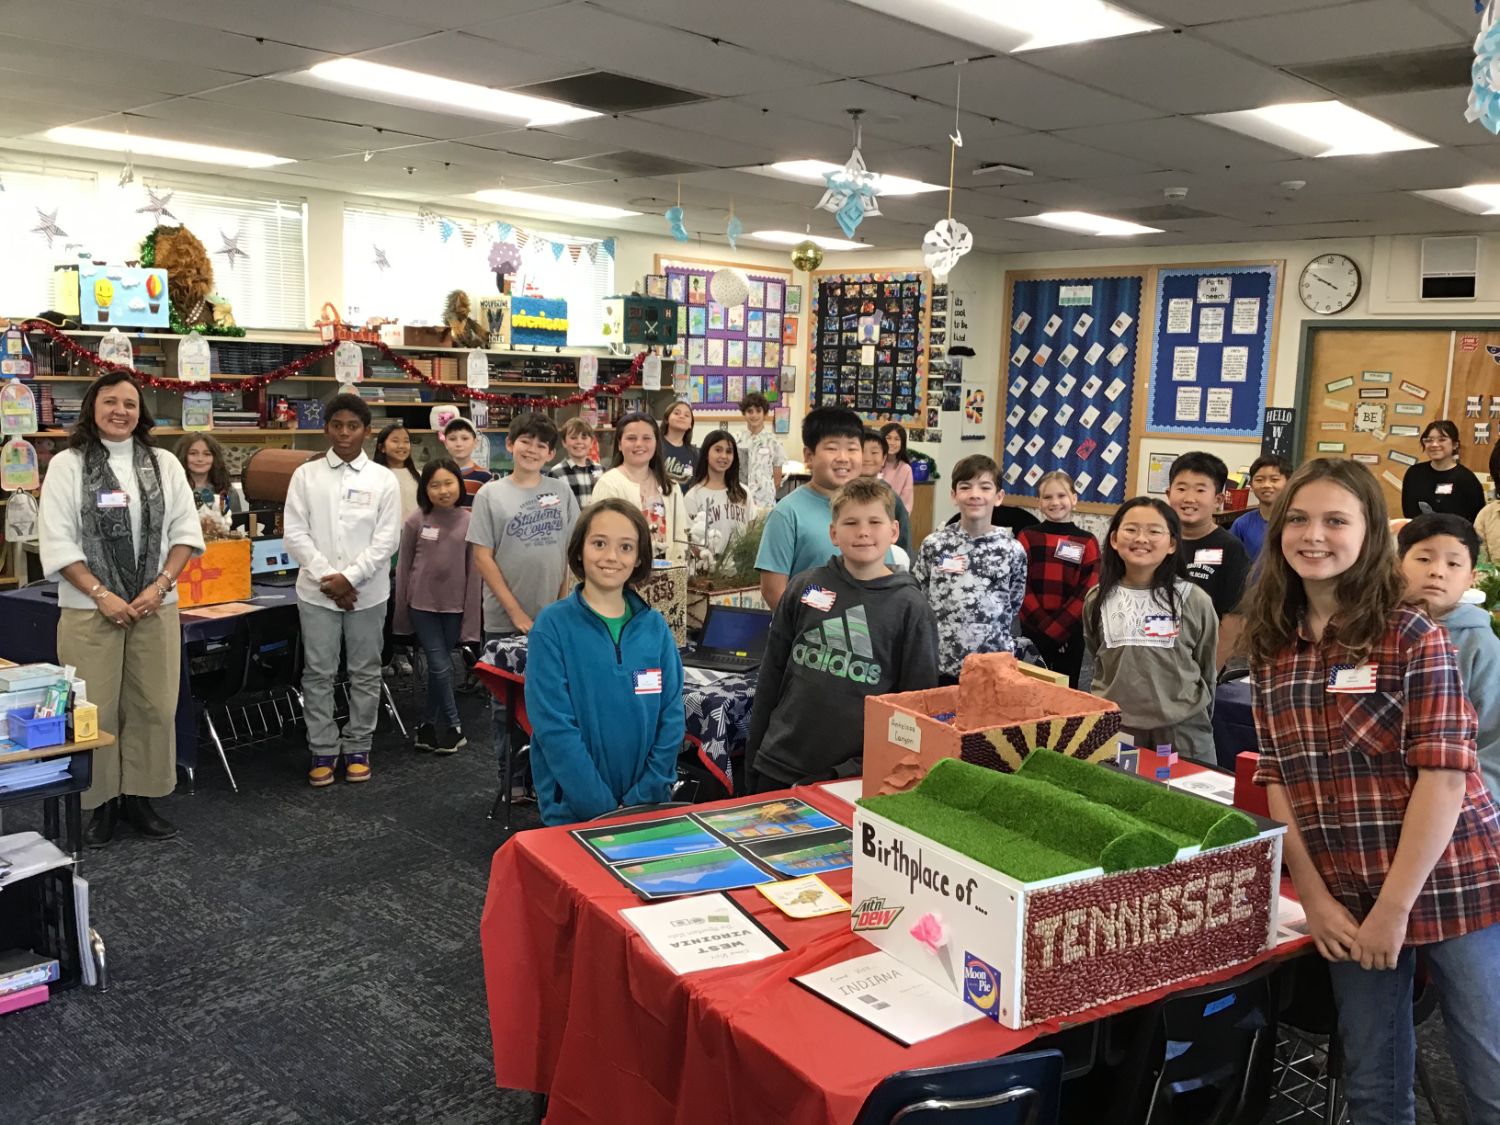 PHOTO: provided by South Pasadena Unified School District | The South Pasadenan | Arroyo Vista fifth graders enthusiastically share their state projects.